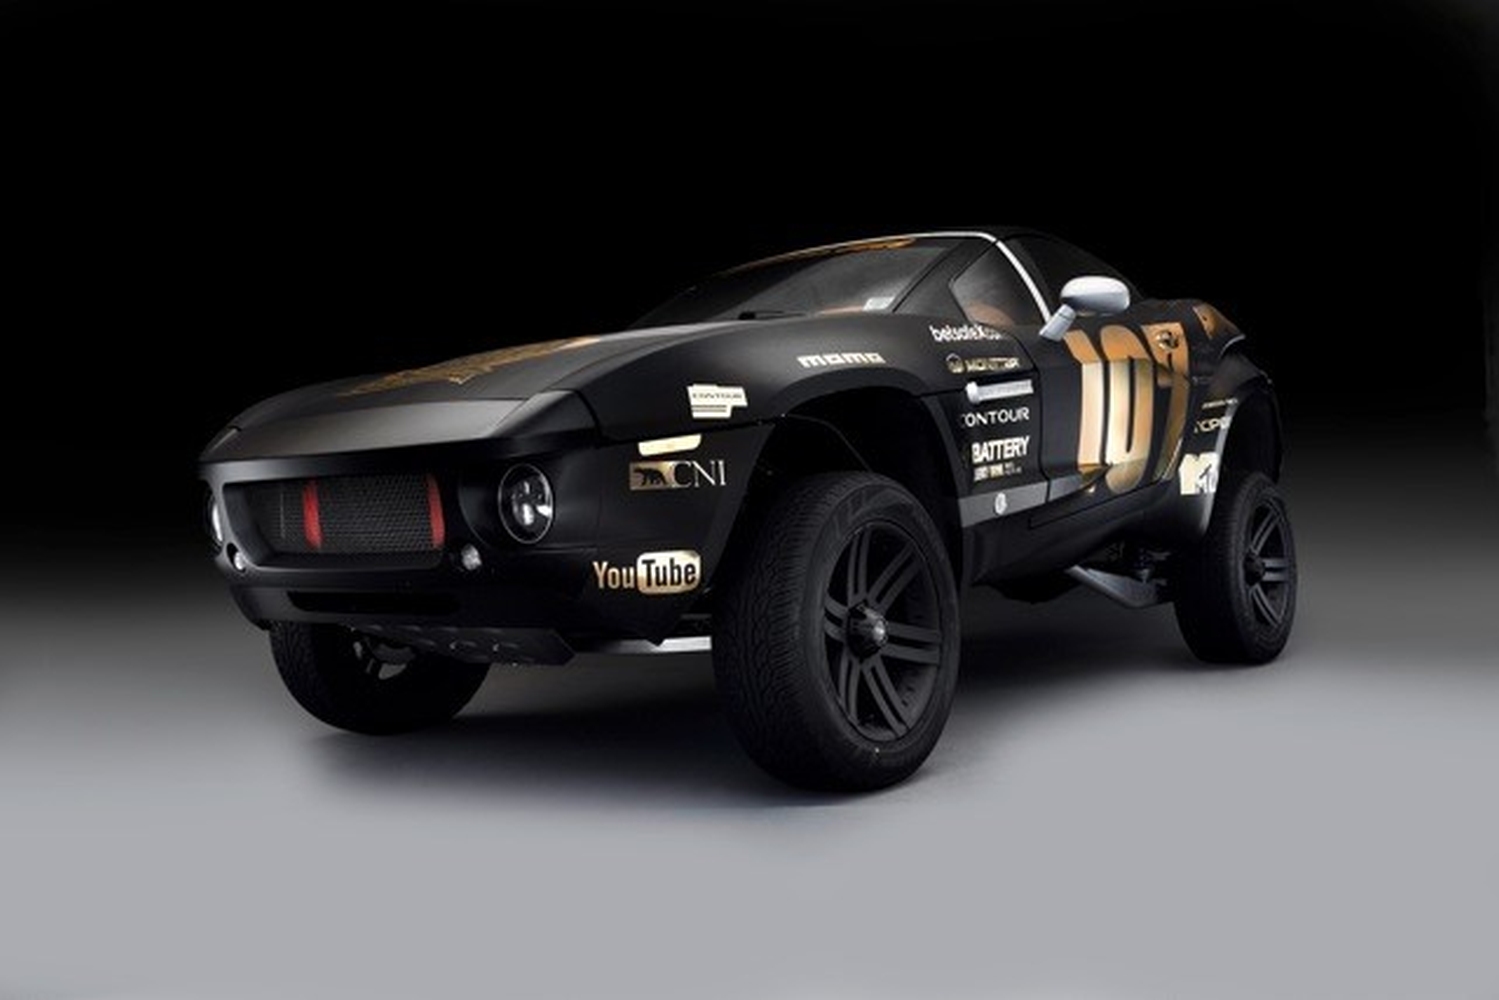 2012 Local Motors Rally Fighter Chassis no. 007